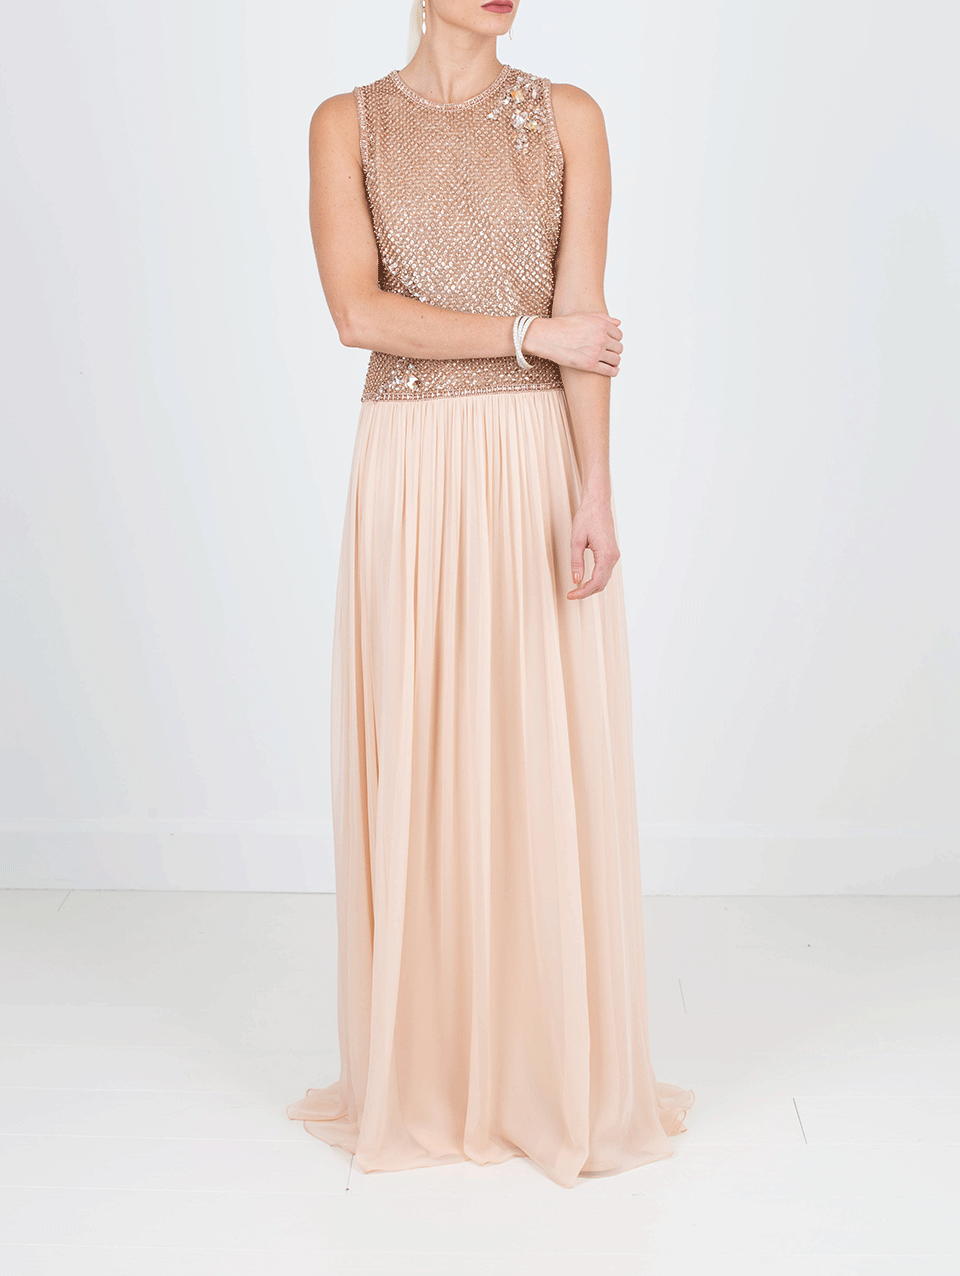 PAMELLA ROLAND-Chiffon Crystal Embroidered Gown-ROSE GOLD